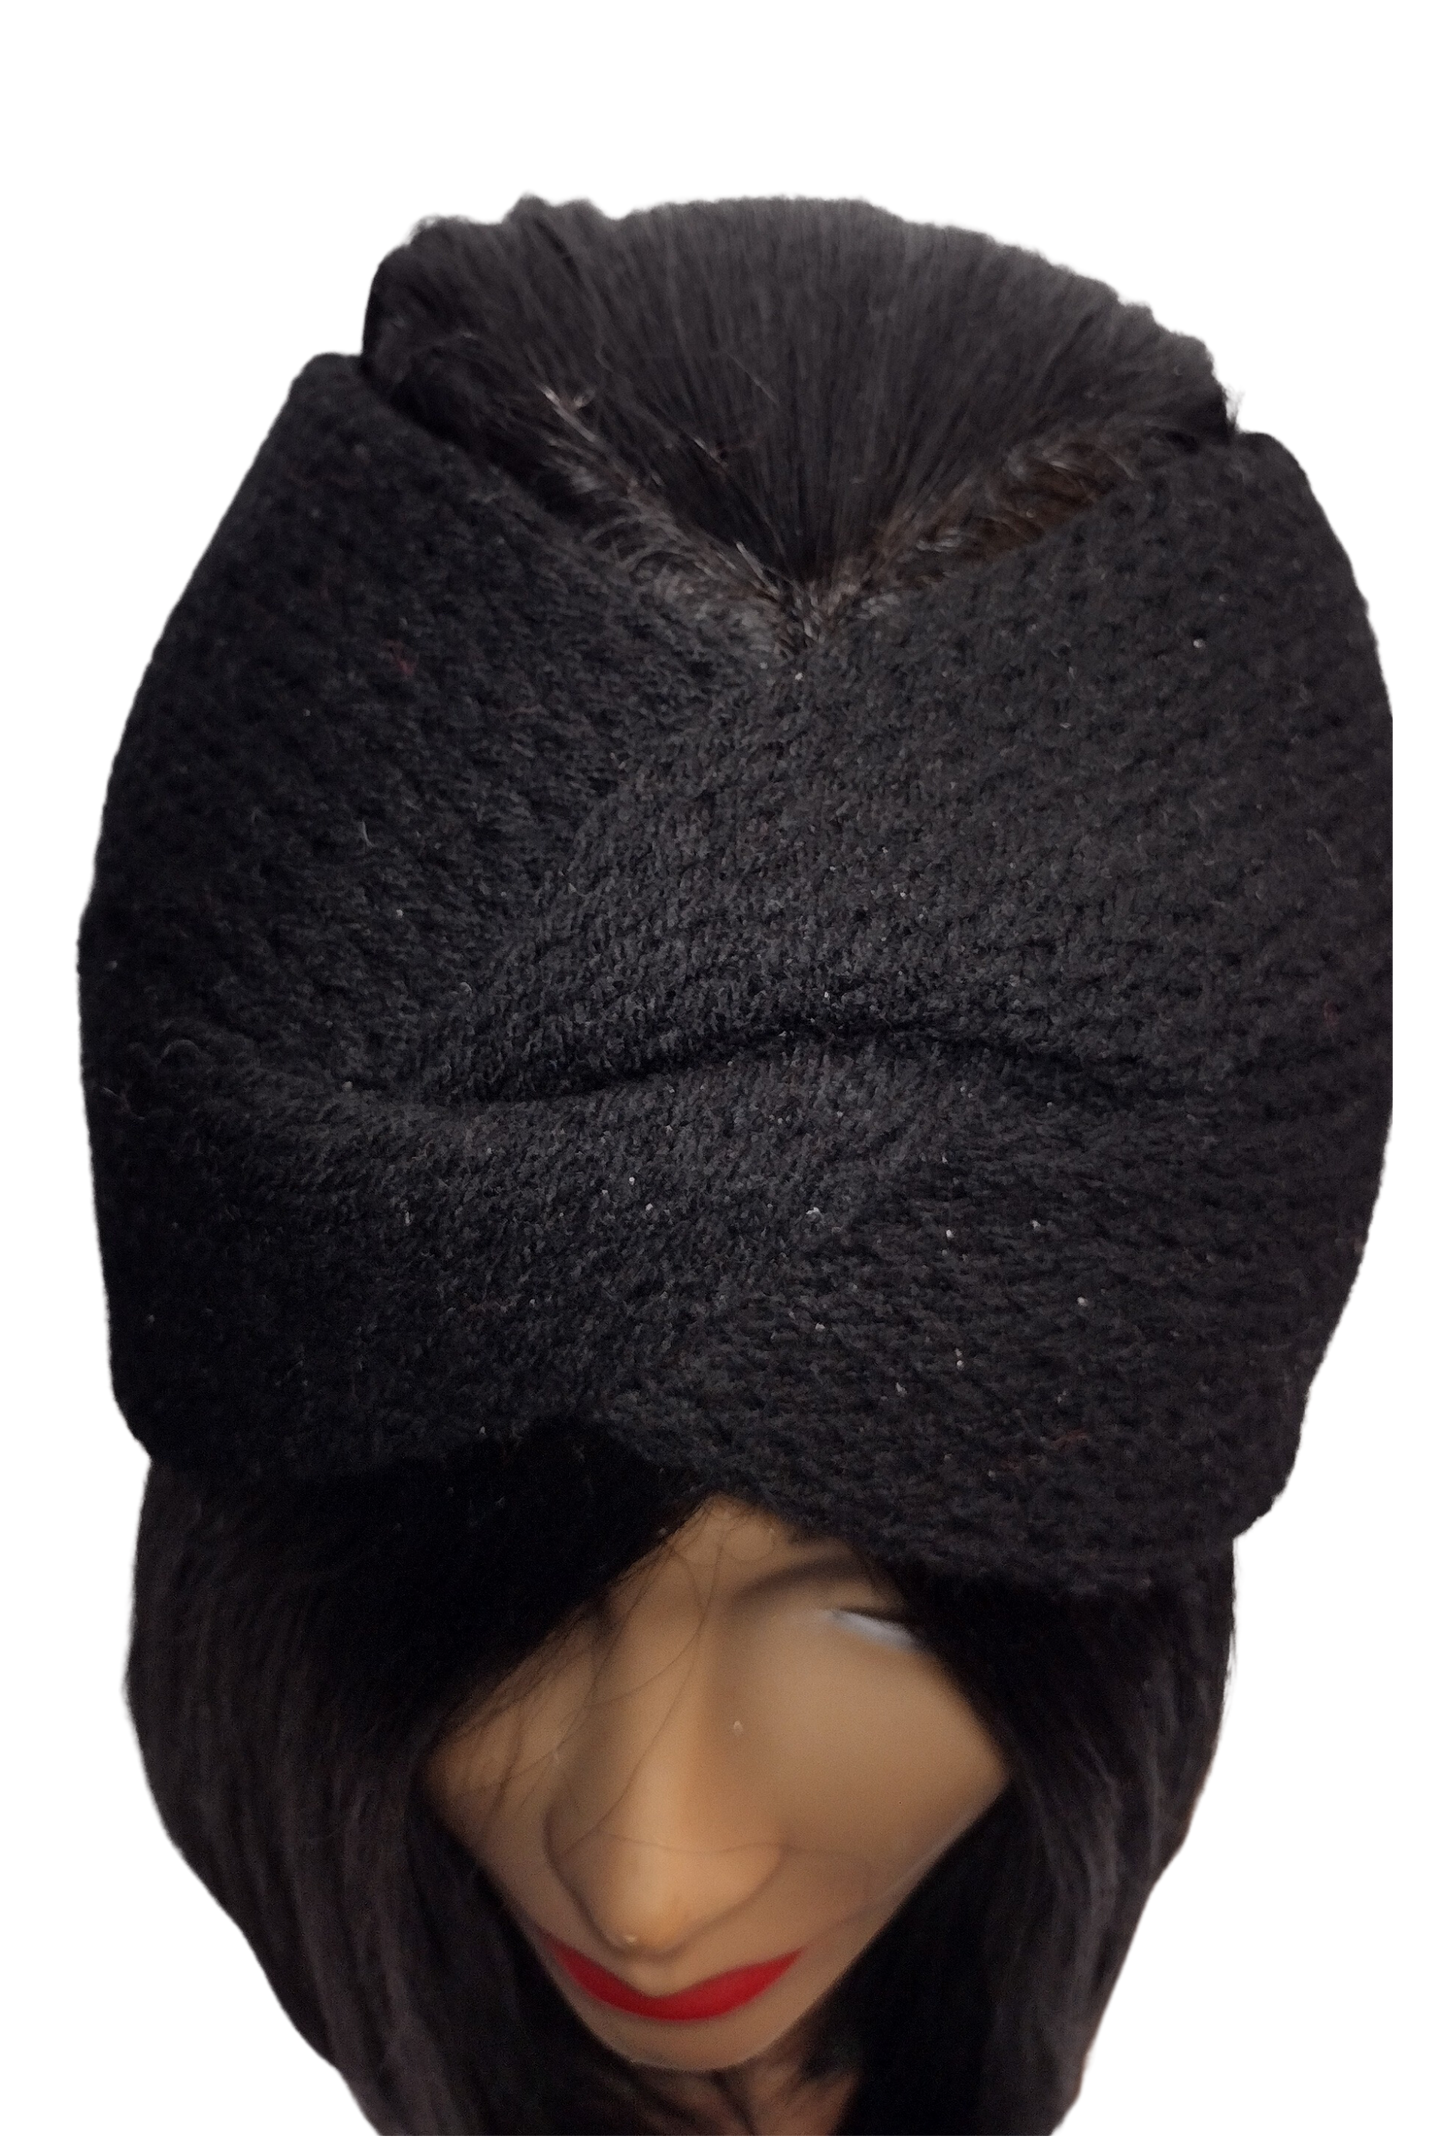 Blk Lotus Co Classic Black Twist Knit Headband: Timeless Style and Cozy Comfort